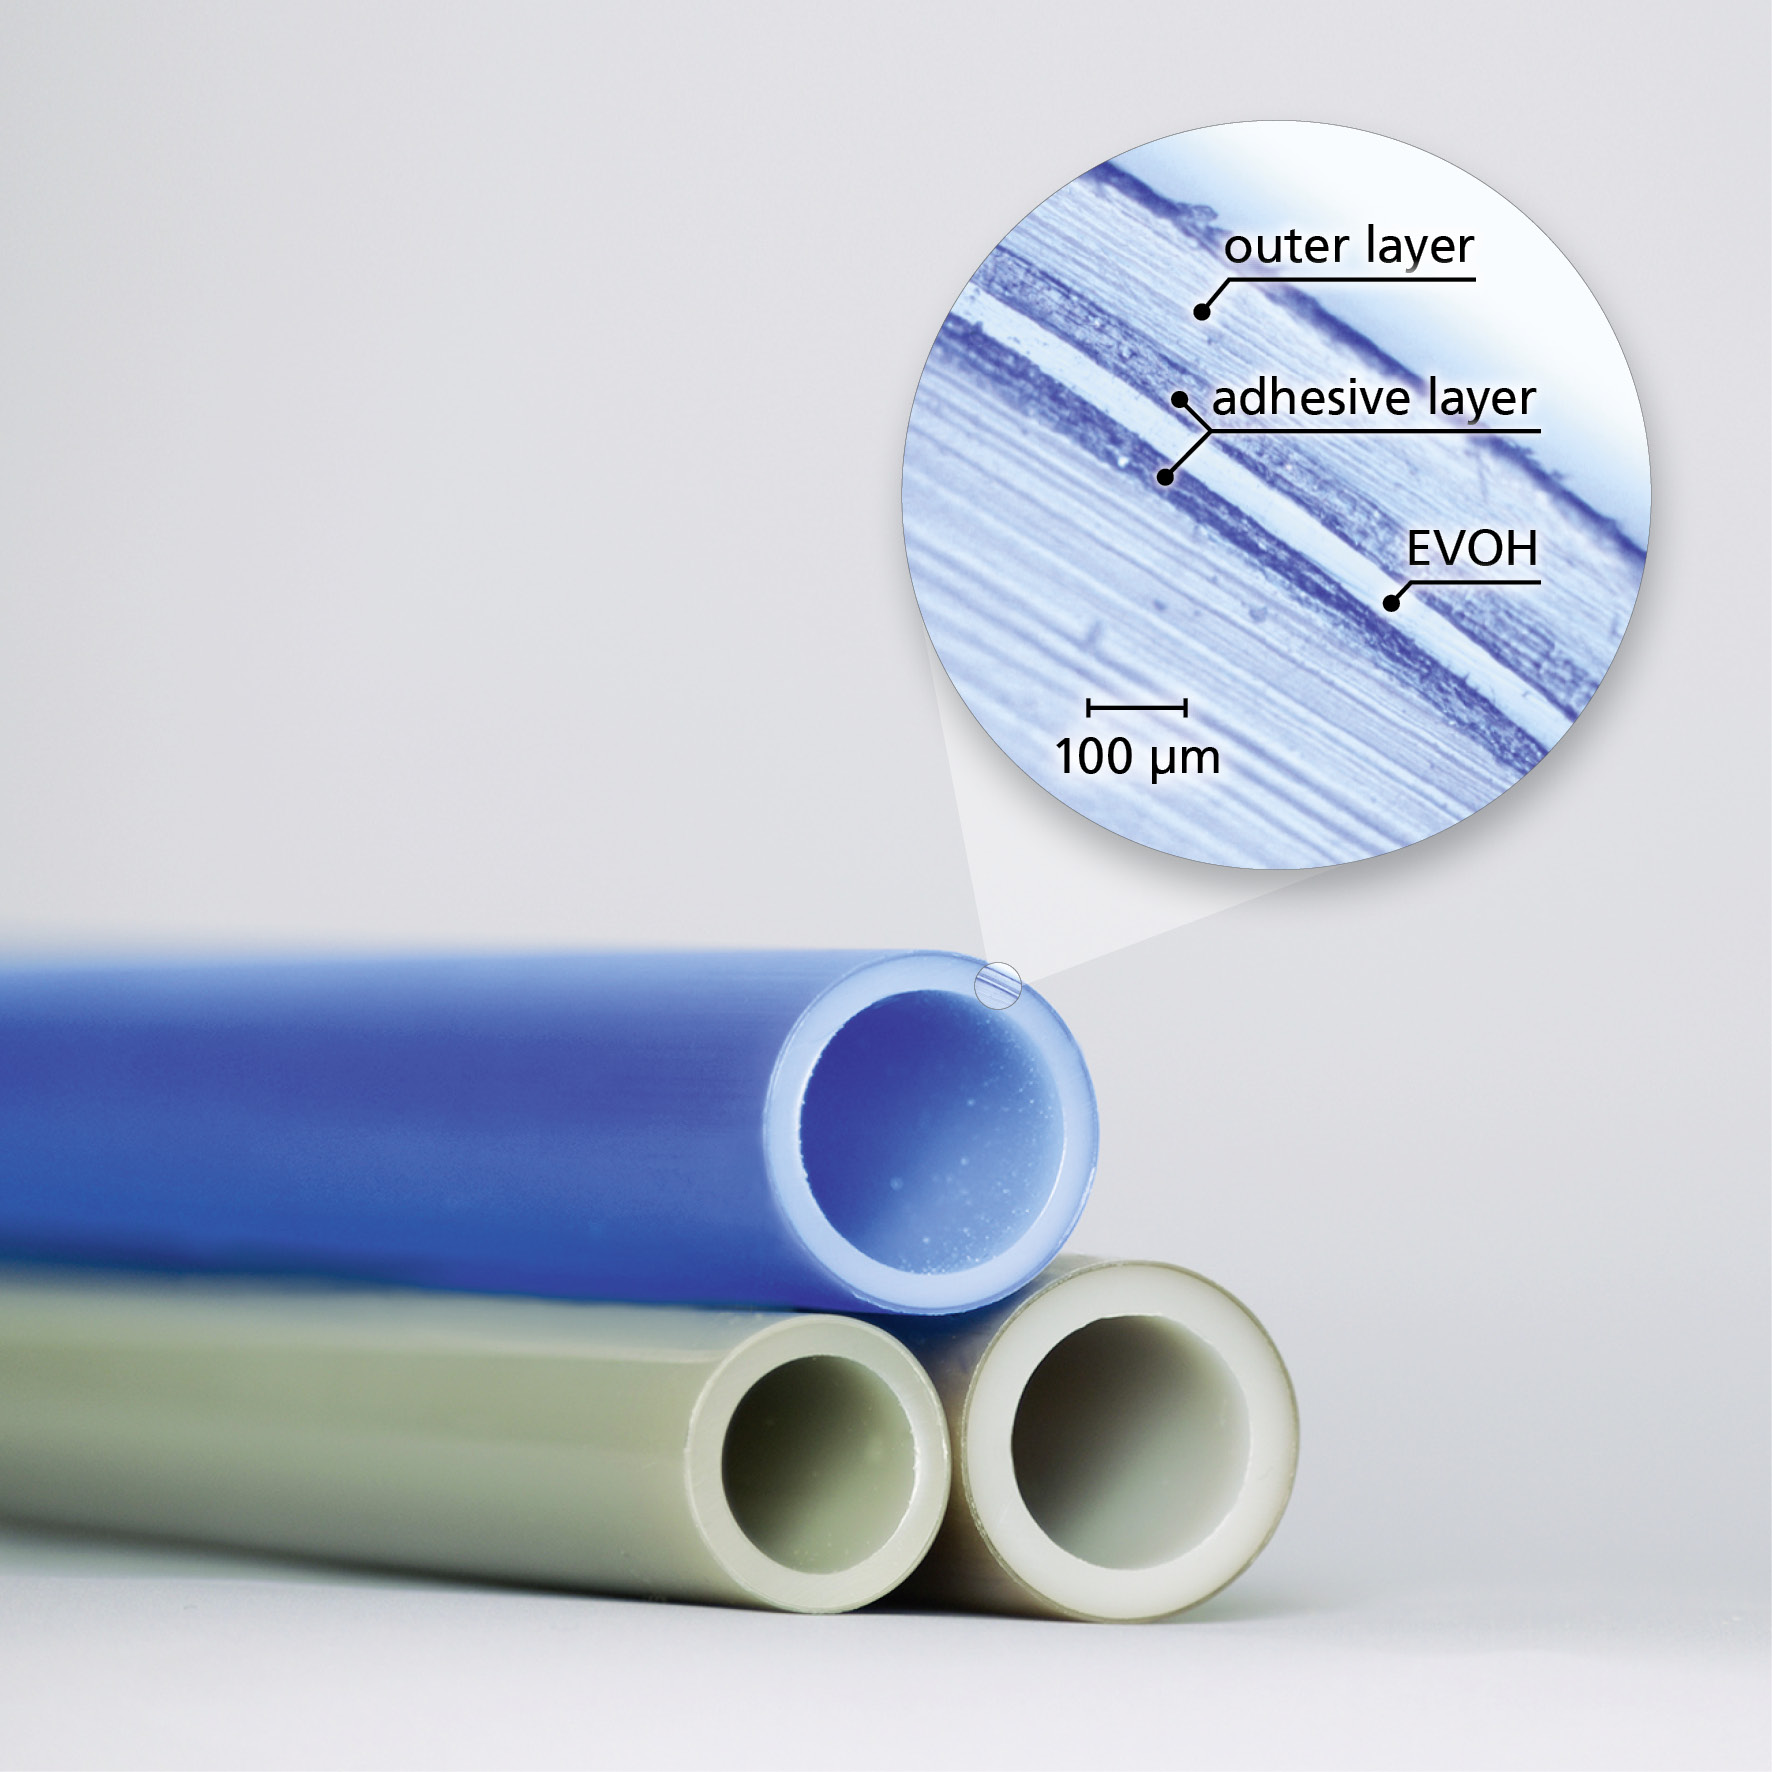 A multilayer plastic pipe consisting of outer and inner layers with an EVOH layer bonded via adhesion promoters in between.